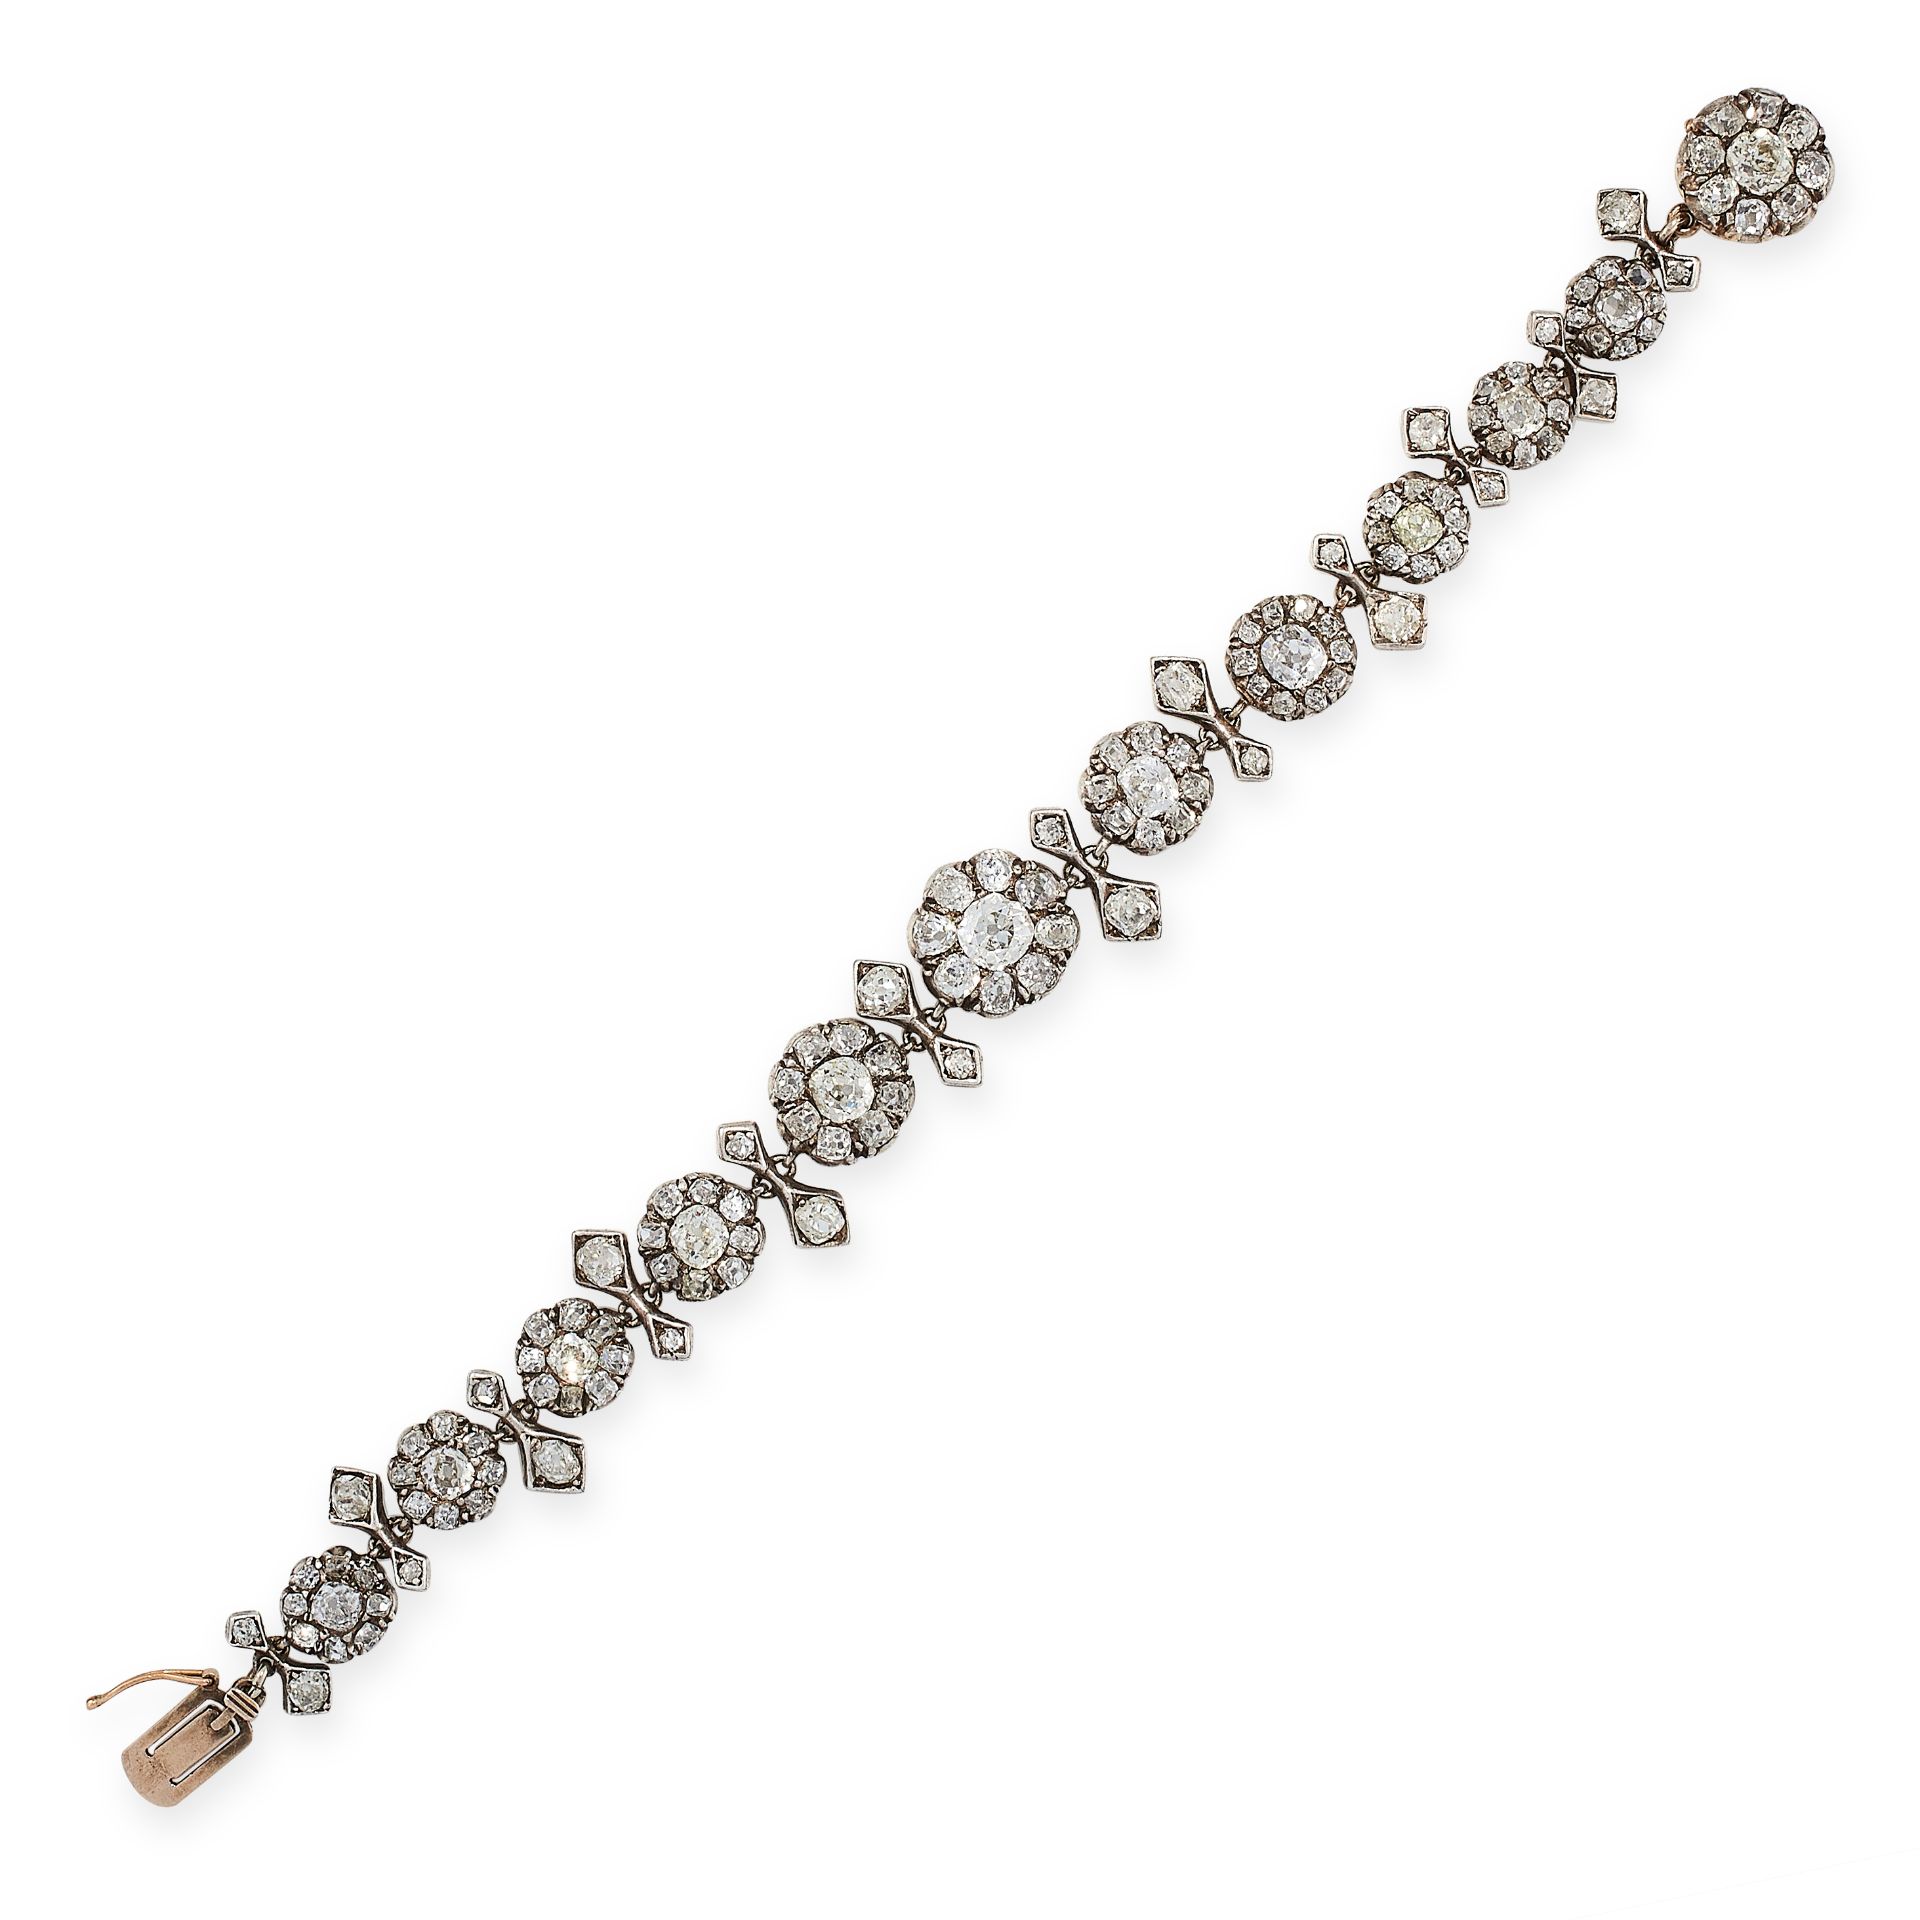 AN ANTIQUE DIAMOND BRACELET, 19TH CENTURY in yellow gold and silver, comprising a single row of